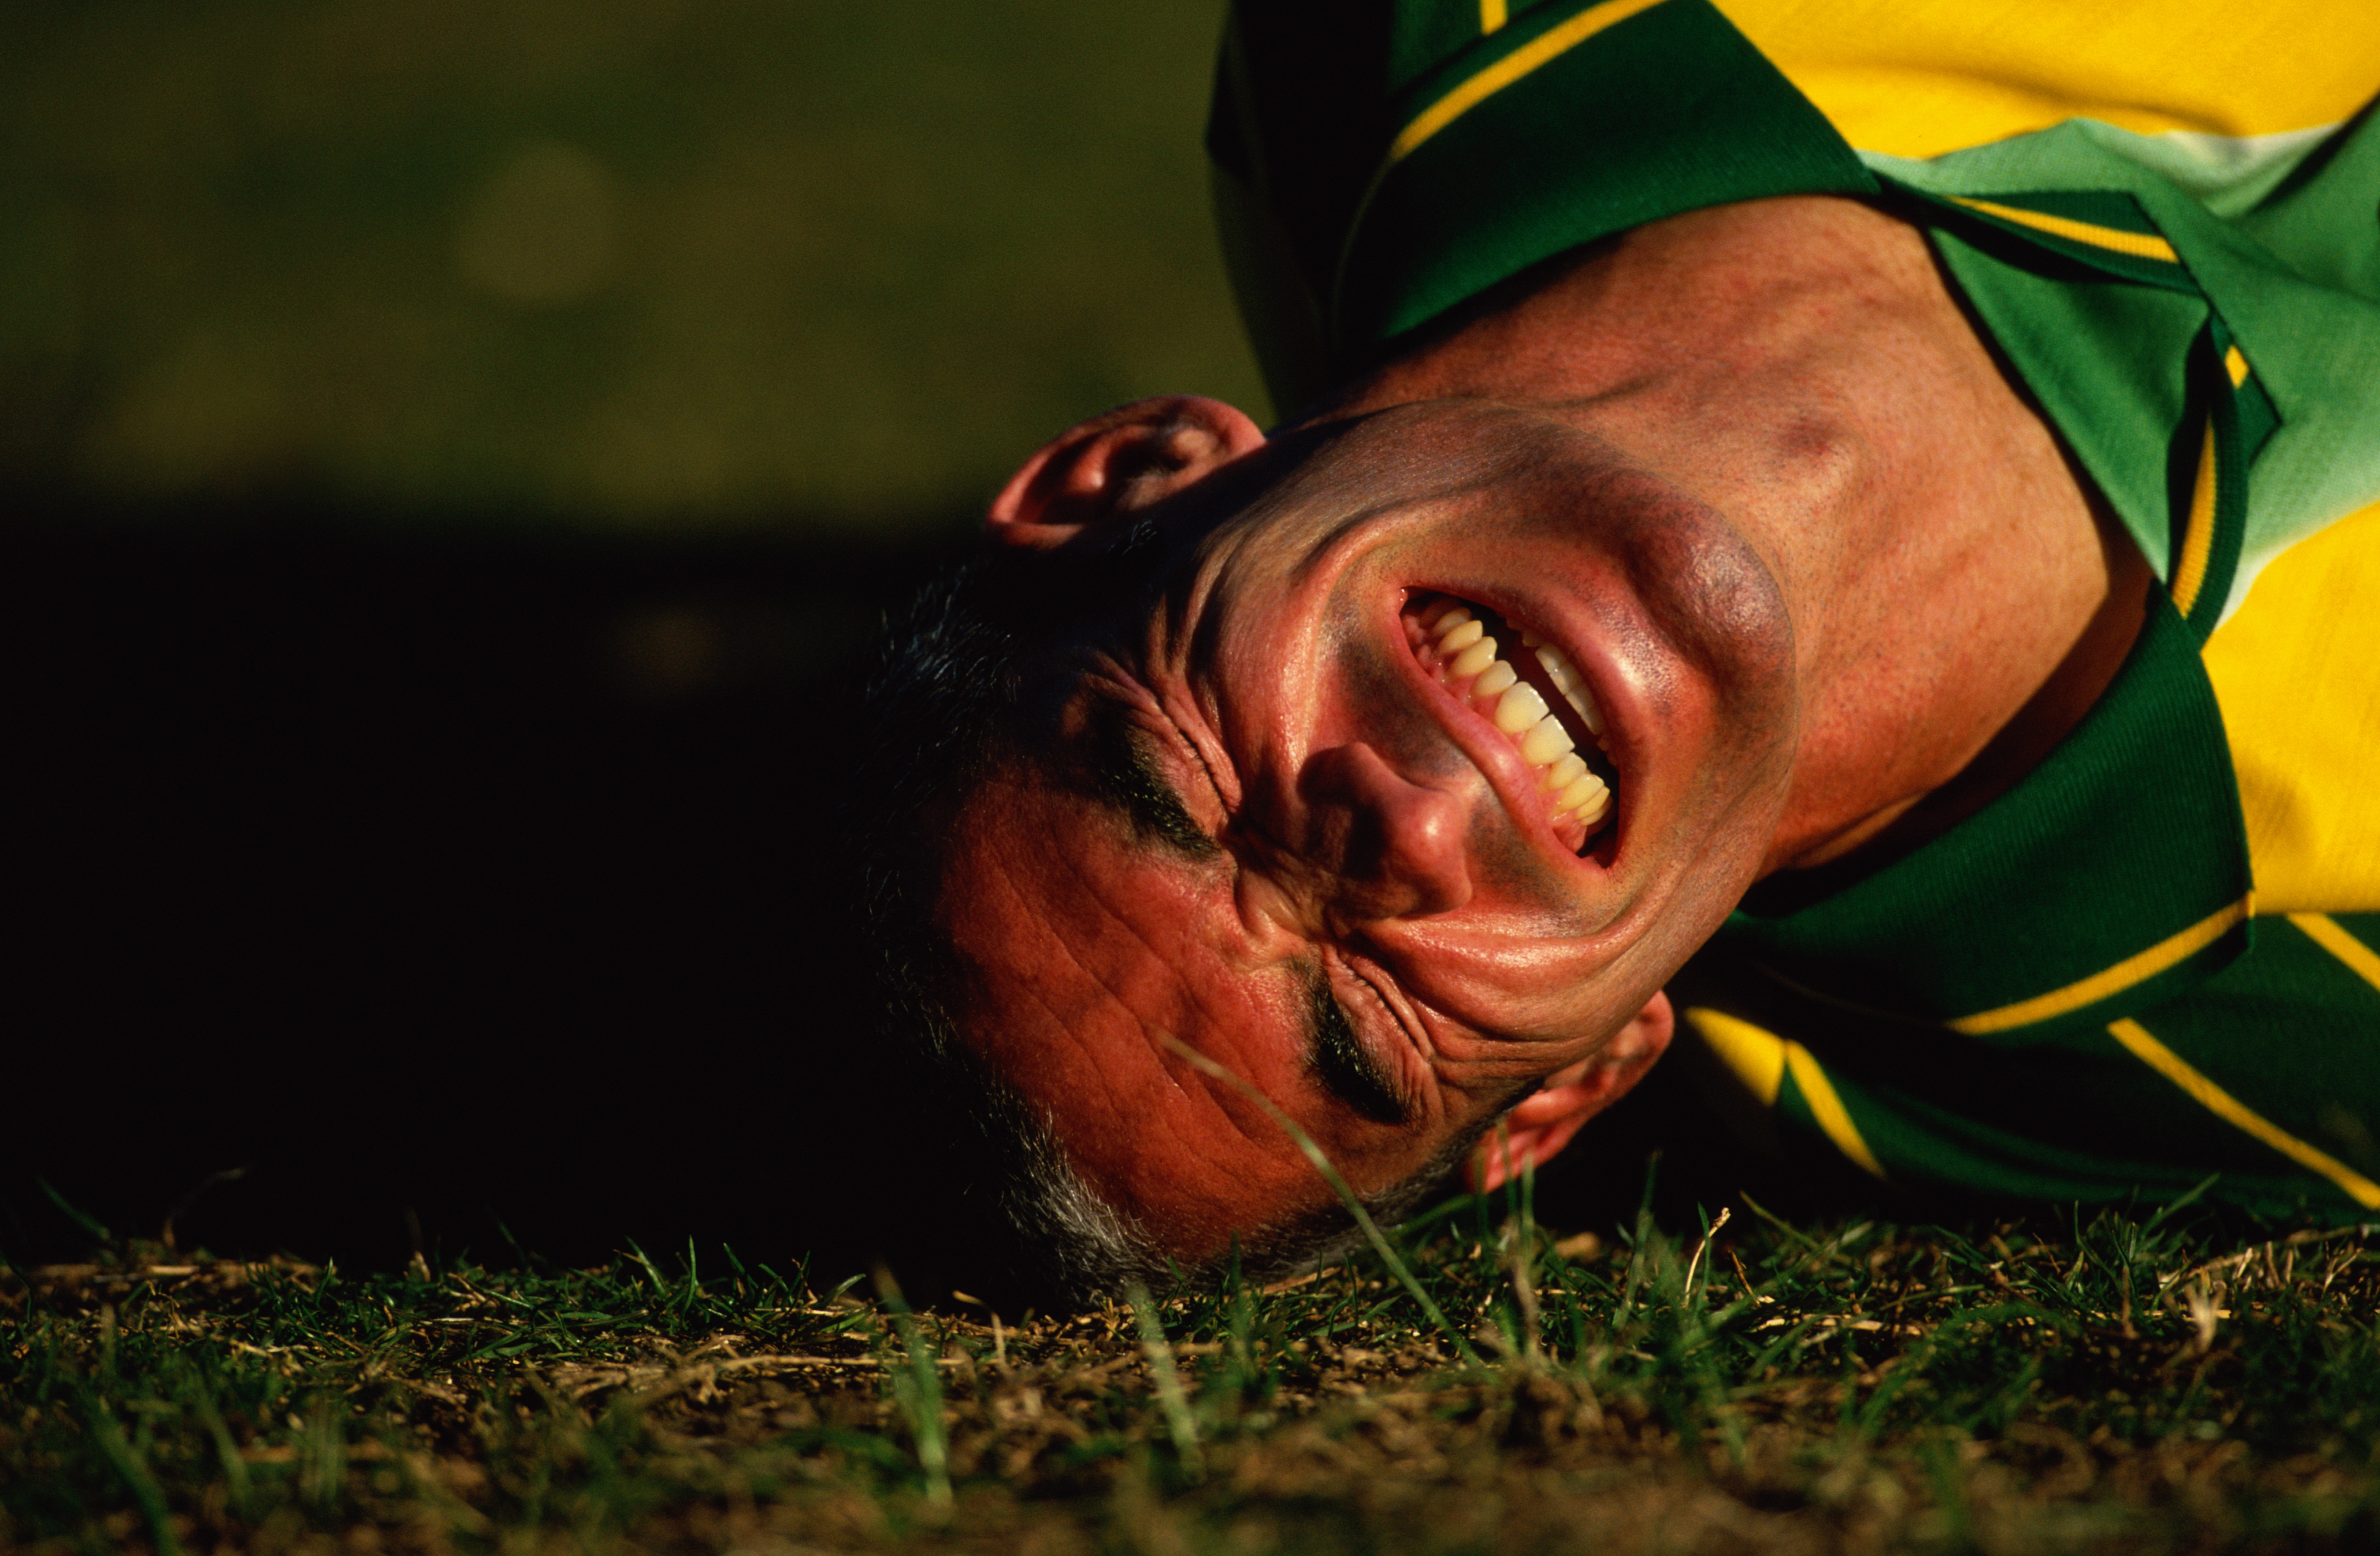 Soccer player on ground in pain